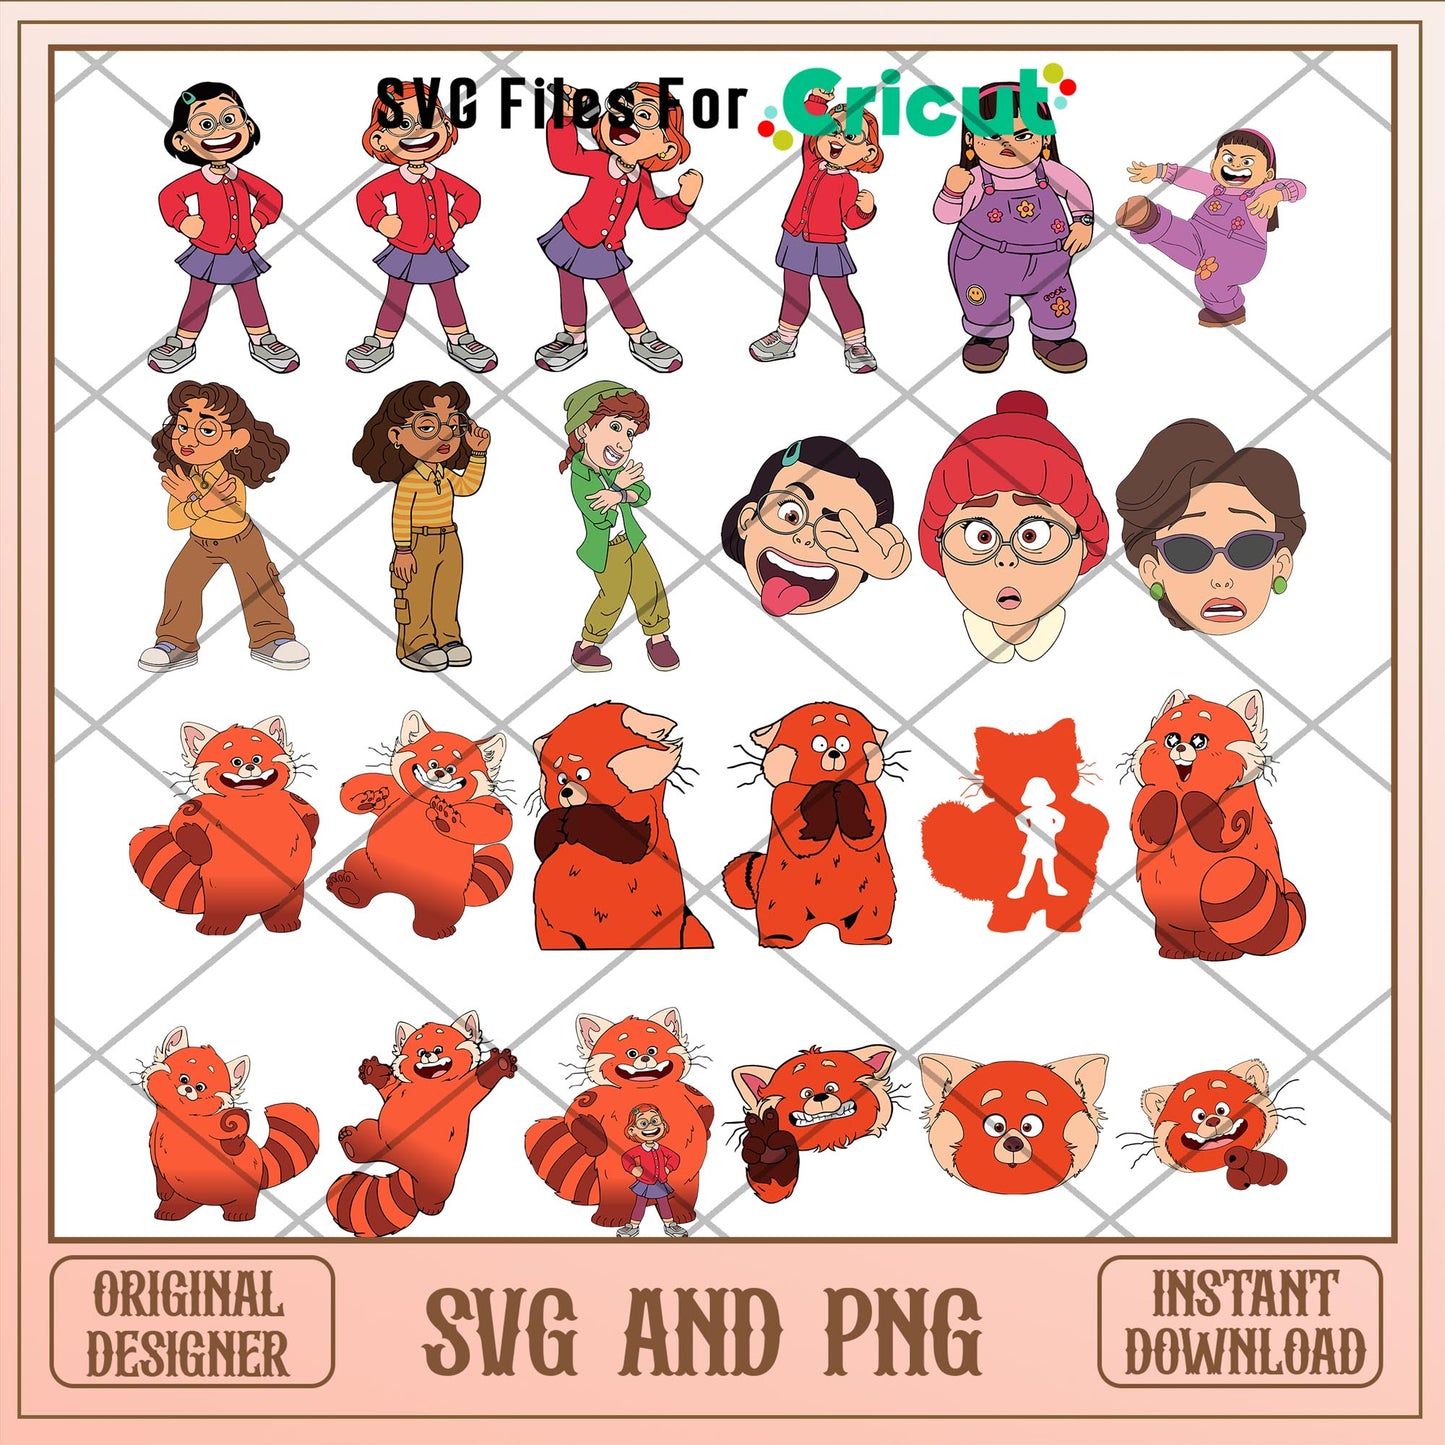 Disney Turning red movie characters svg bundle 